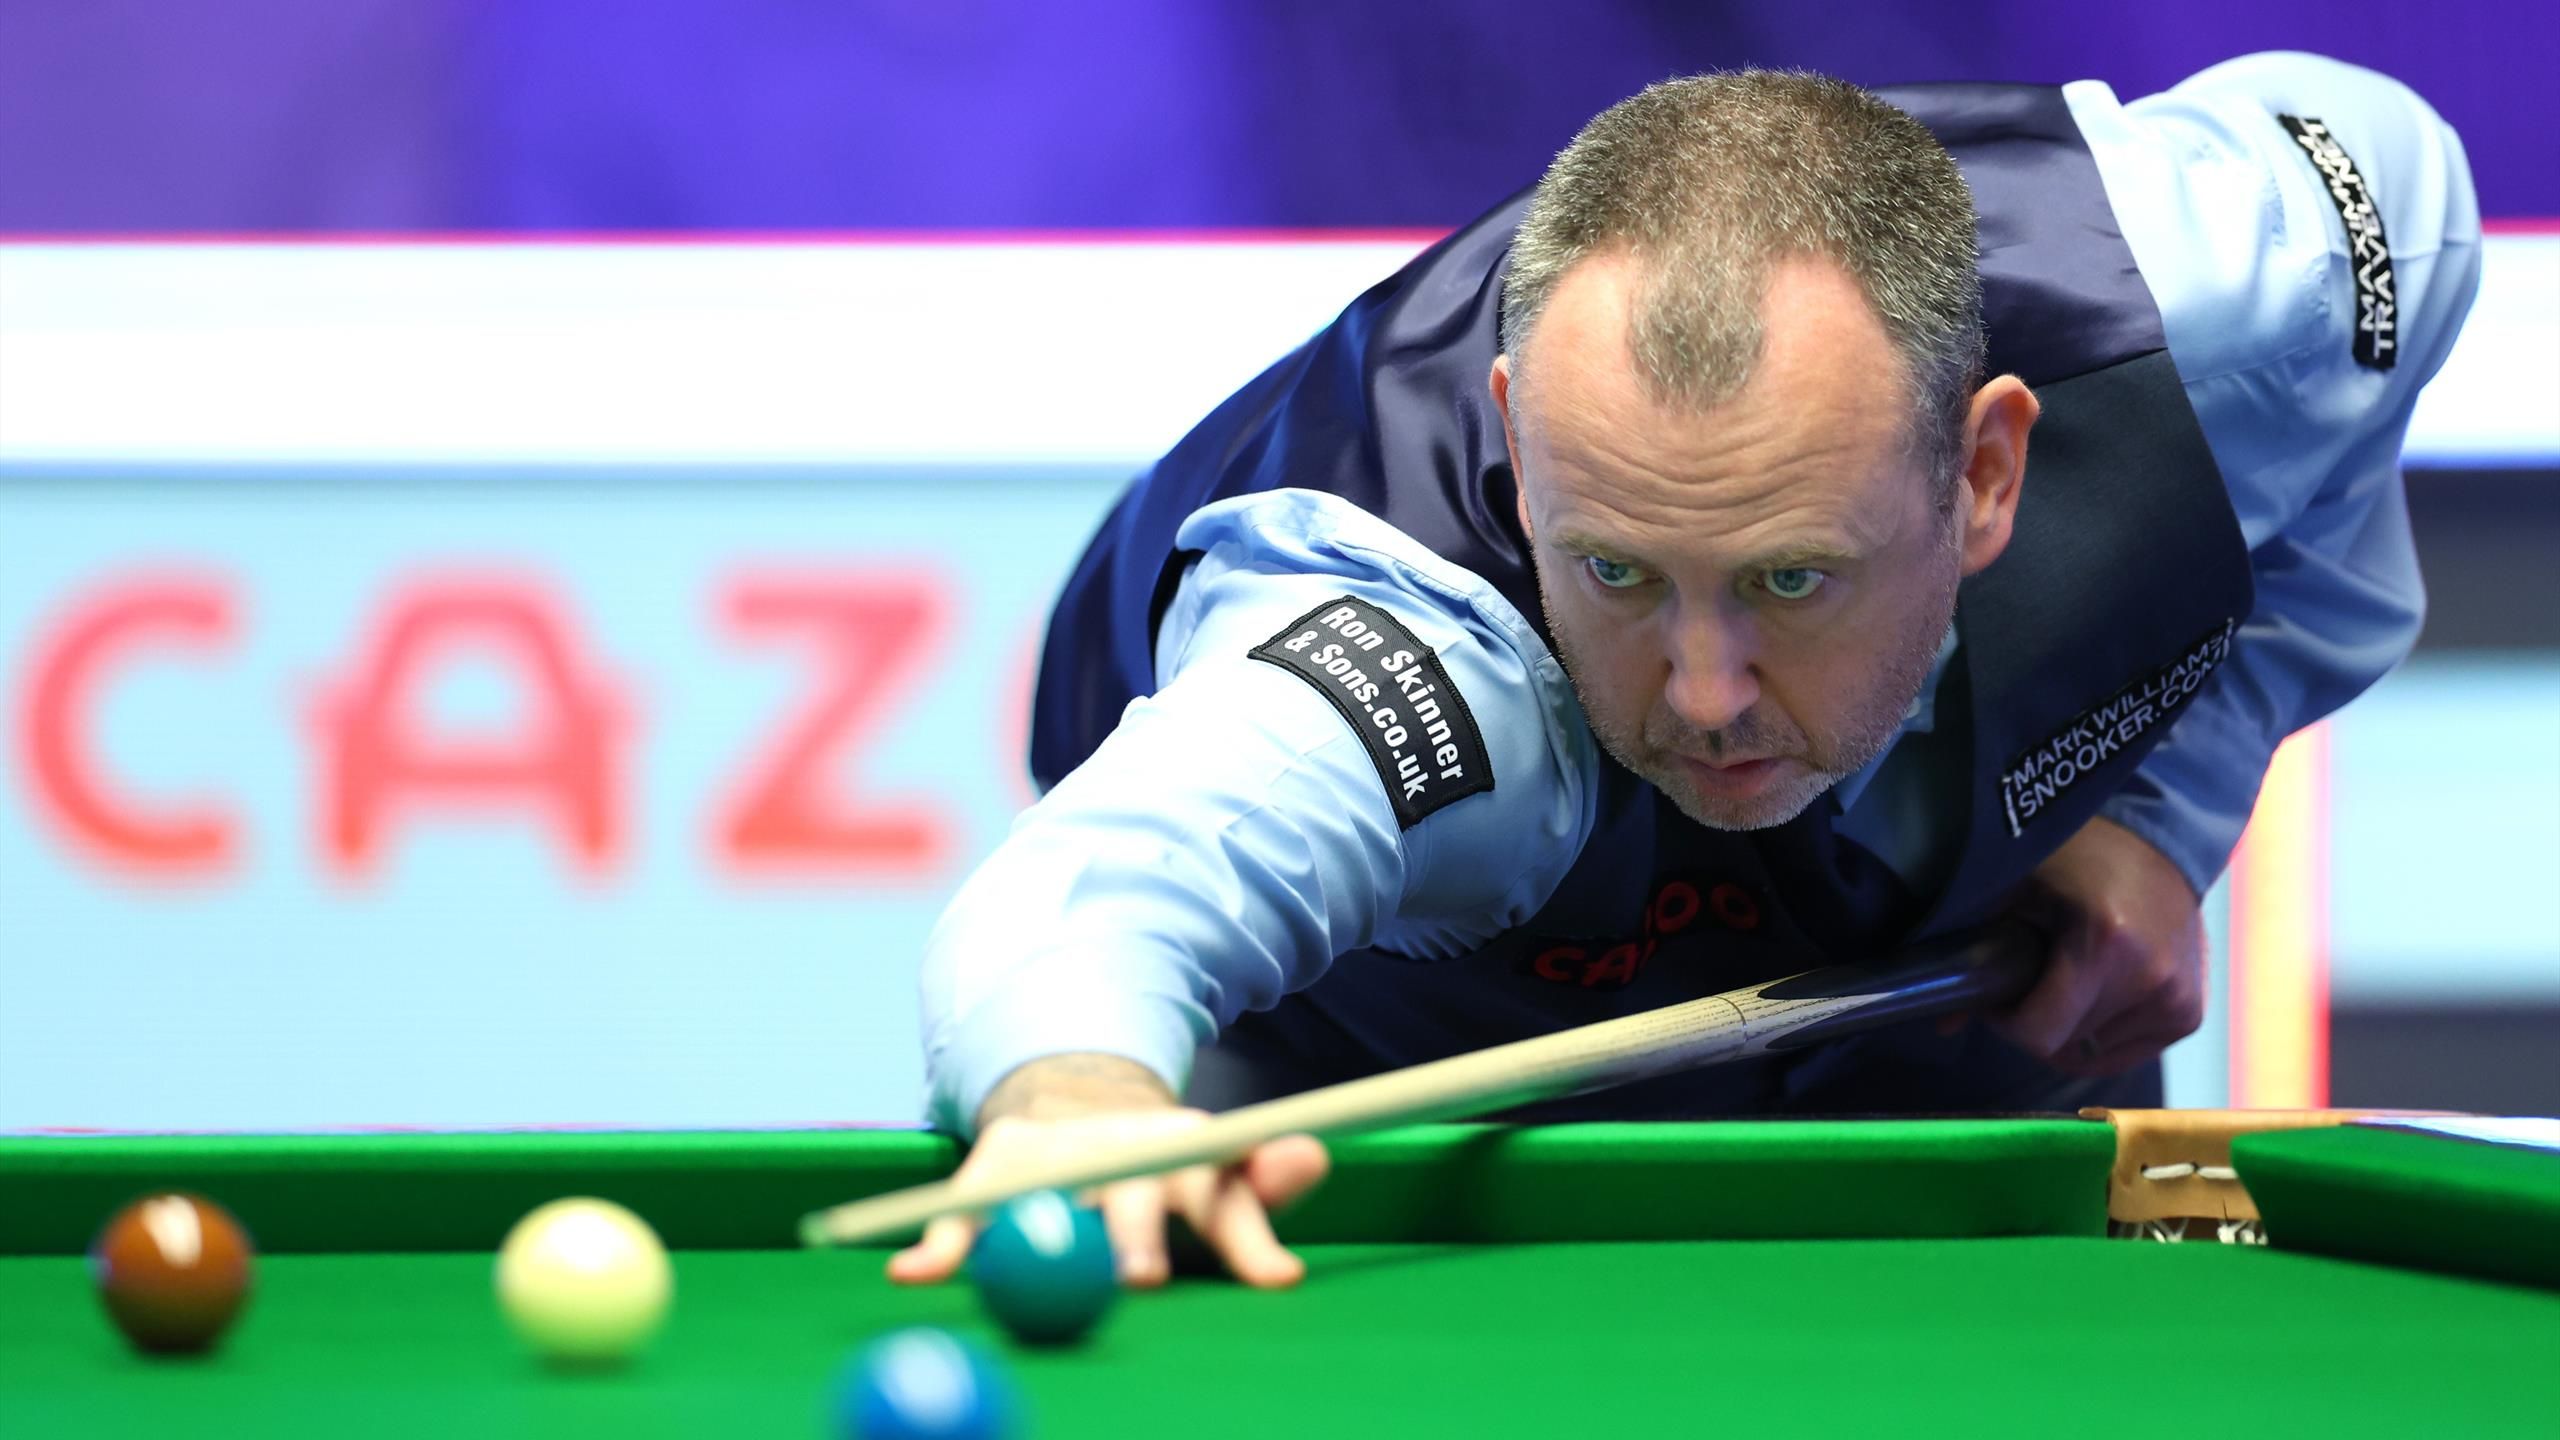 Mark Williams on Shanghai Masters snooker return Ive been to China for 31 years and all Ive seen is the Great Wall